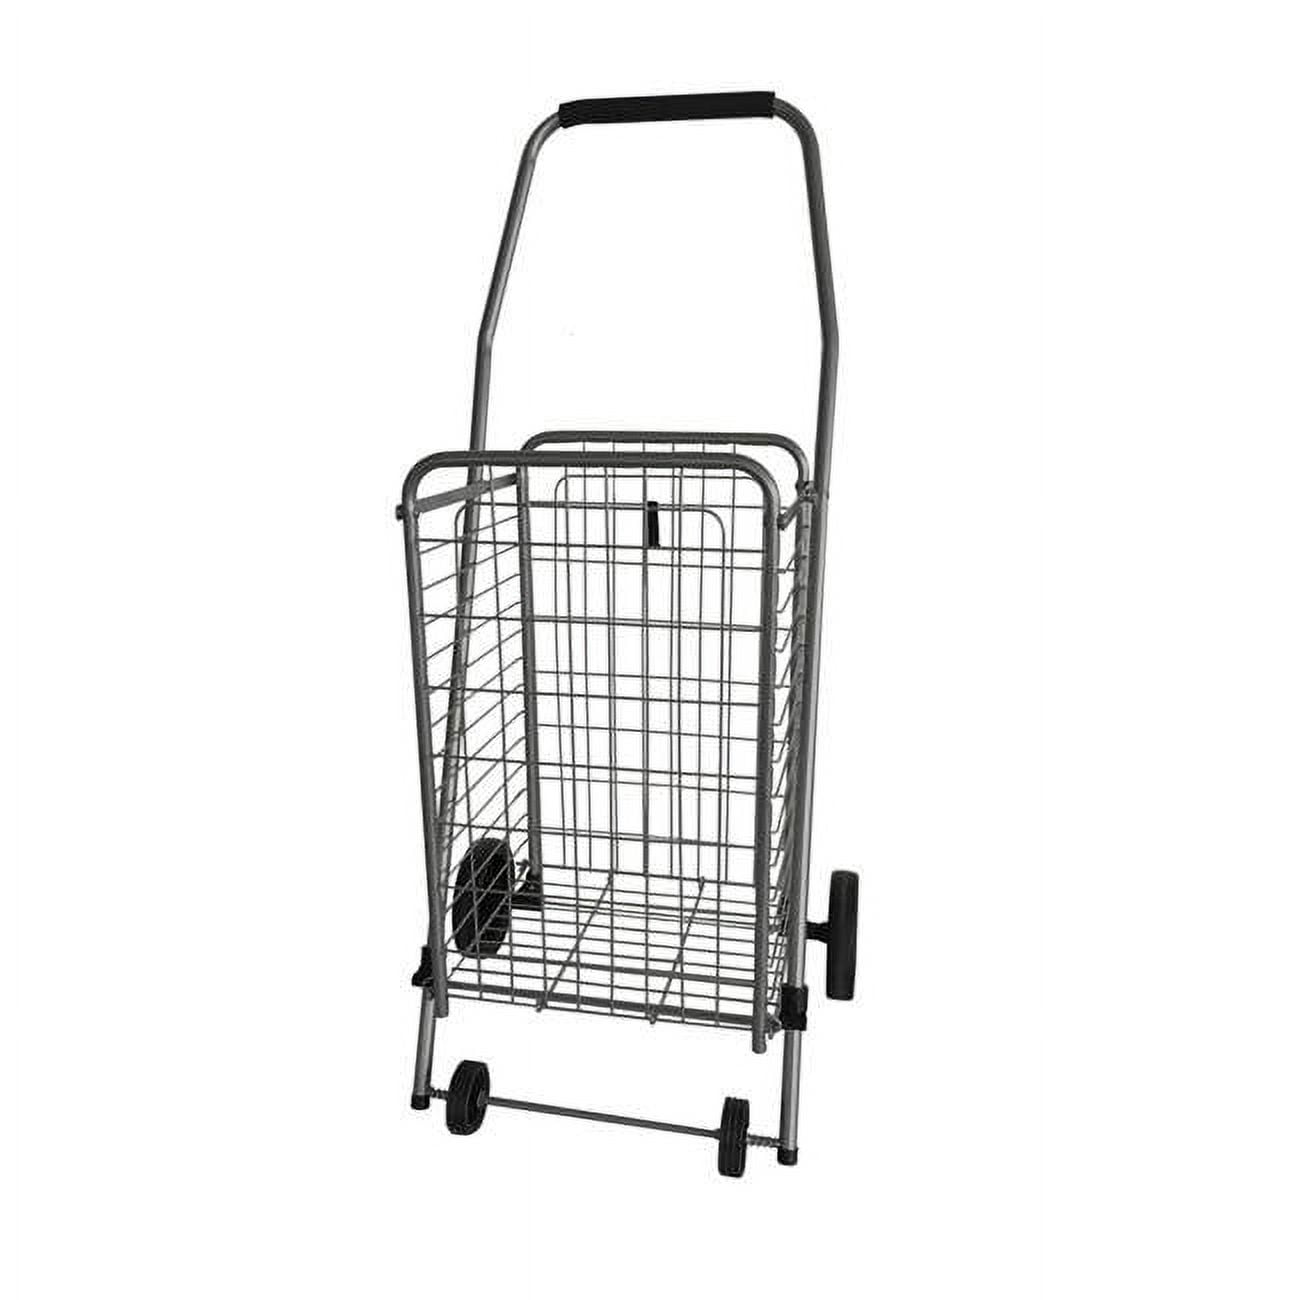 Picture of Apex 6029570 37.6 x 14.8 x 18.5 in. Collapsible Shopping Cart, Gray